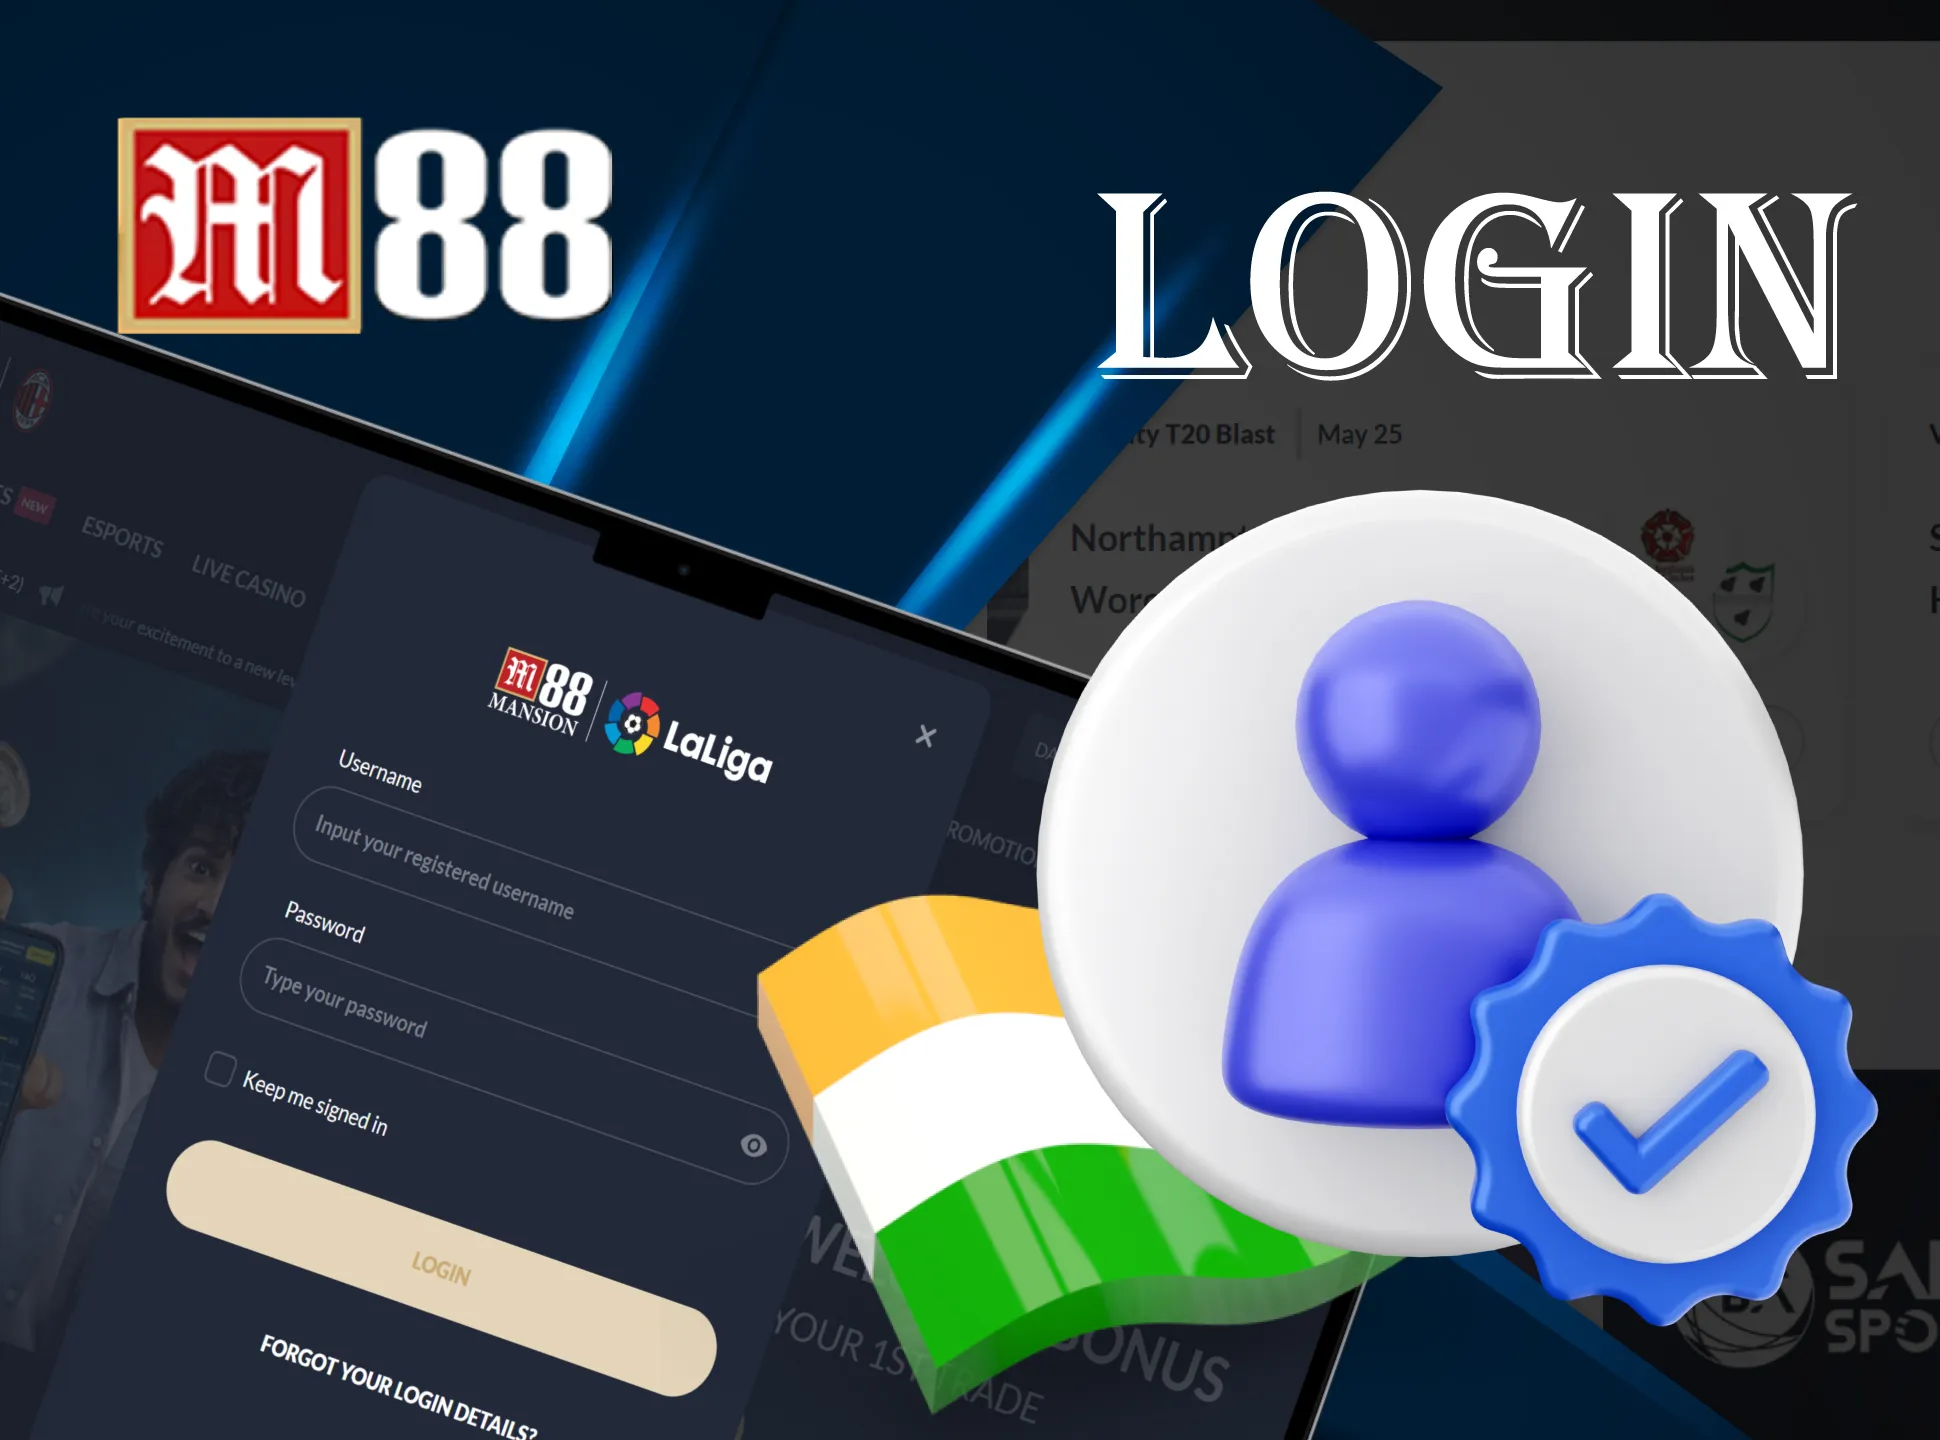 Use your M88 account for logging in.